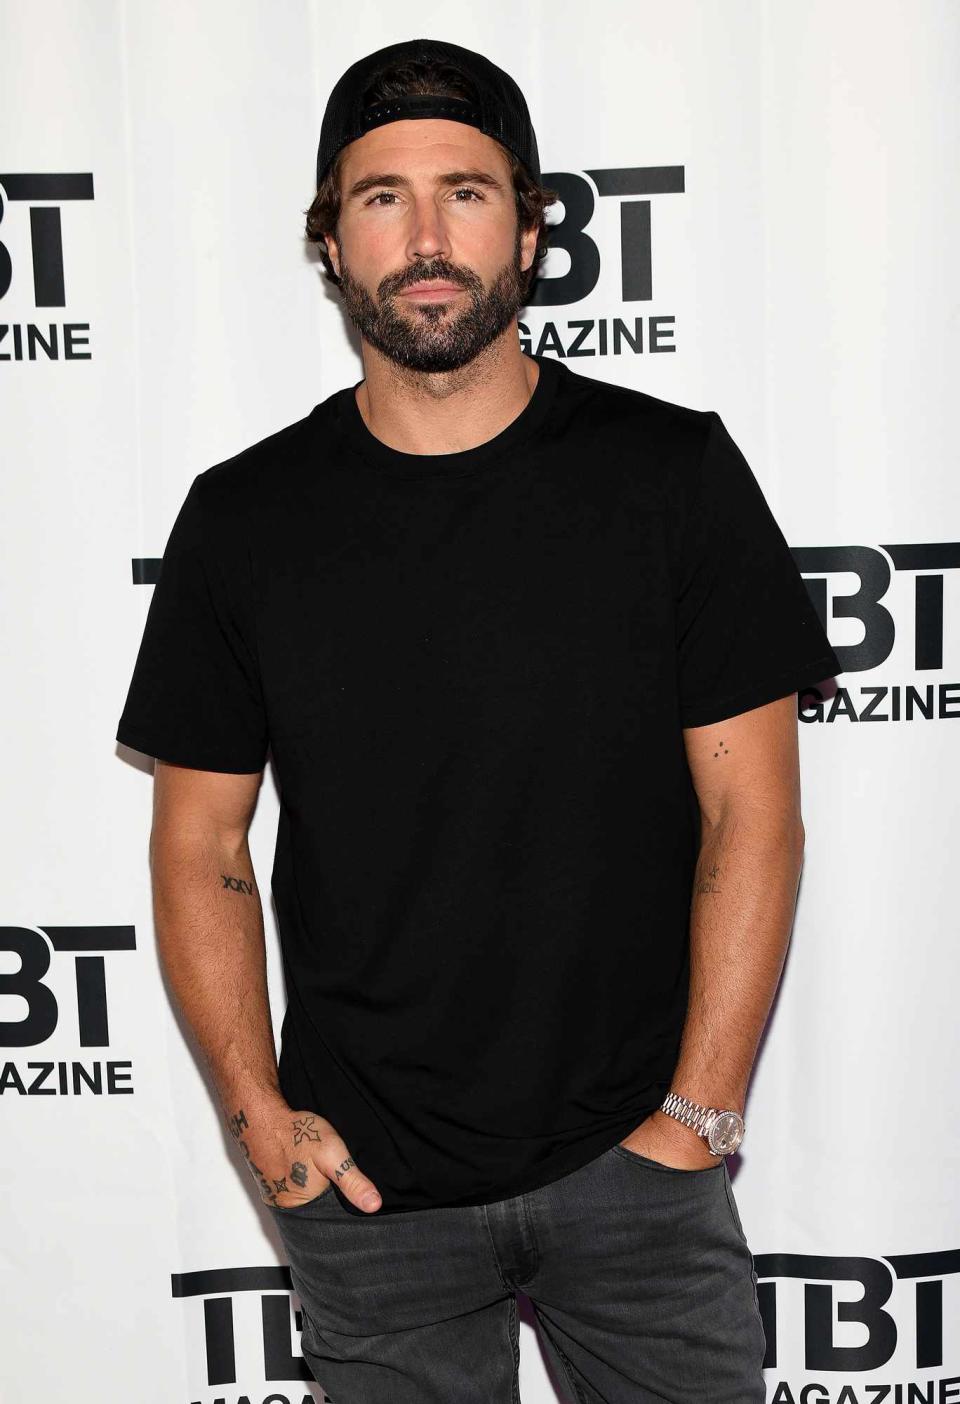 Brody Jenner attends the TBT Magazine Charleston launch party powered by Berman Law Group on April 28, 2022 at Ink Charleston in Charleston, South Carolina